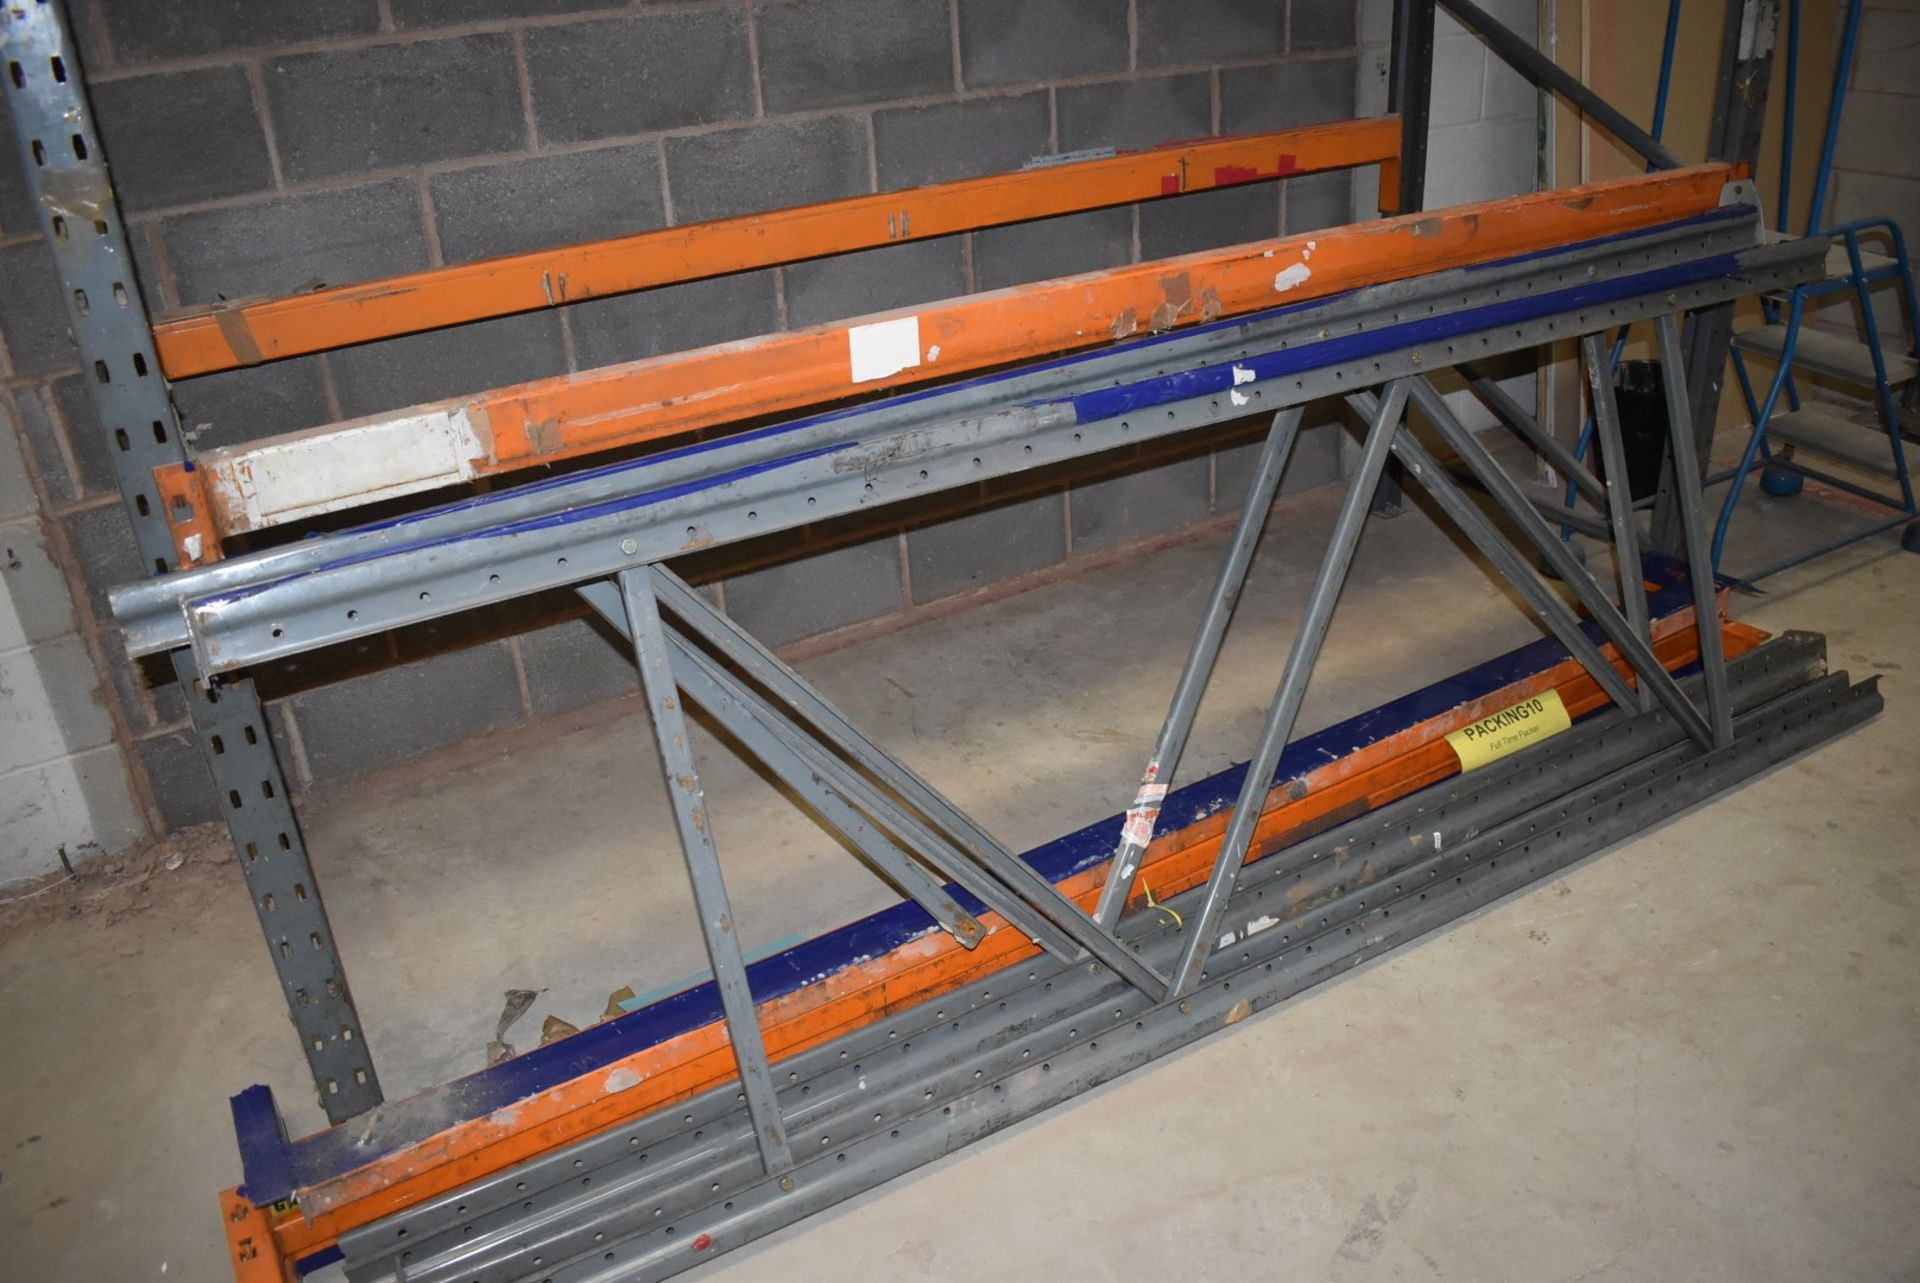 3 x Bays of Warehouse Racking - Lot Includes 4 x Uprights and 8 x Crossbeams - Dimensions: Approx - Image 2 of 2